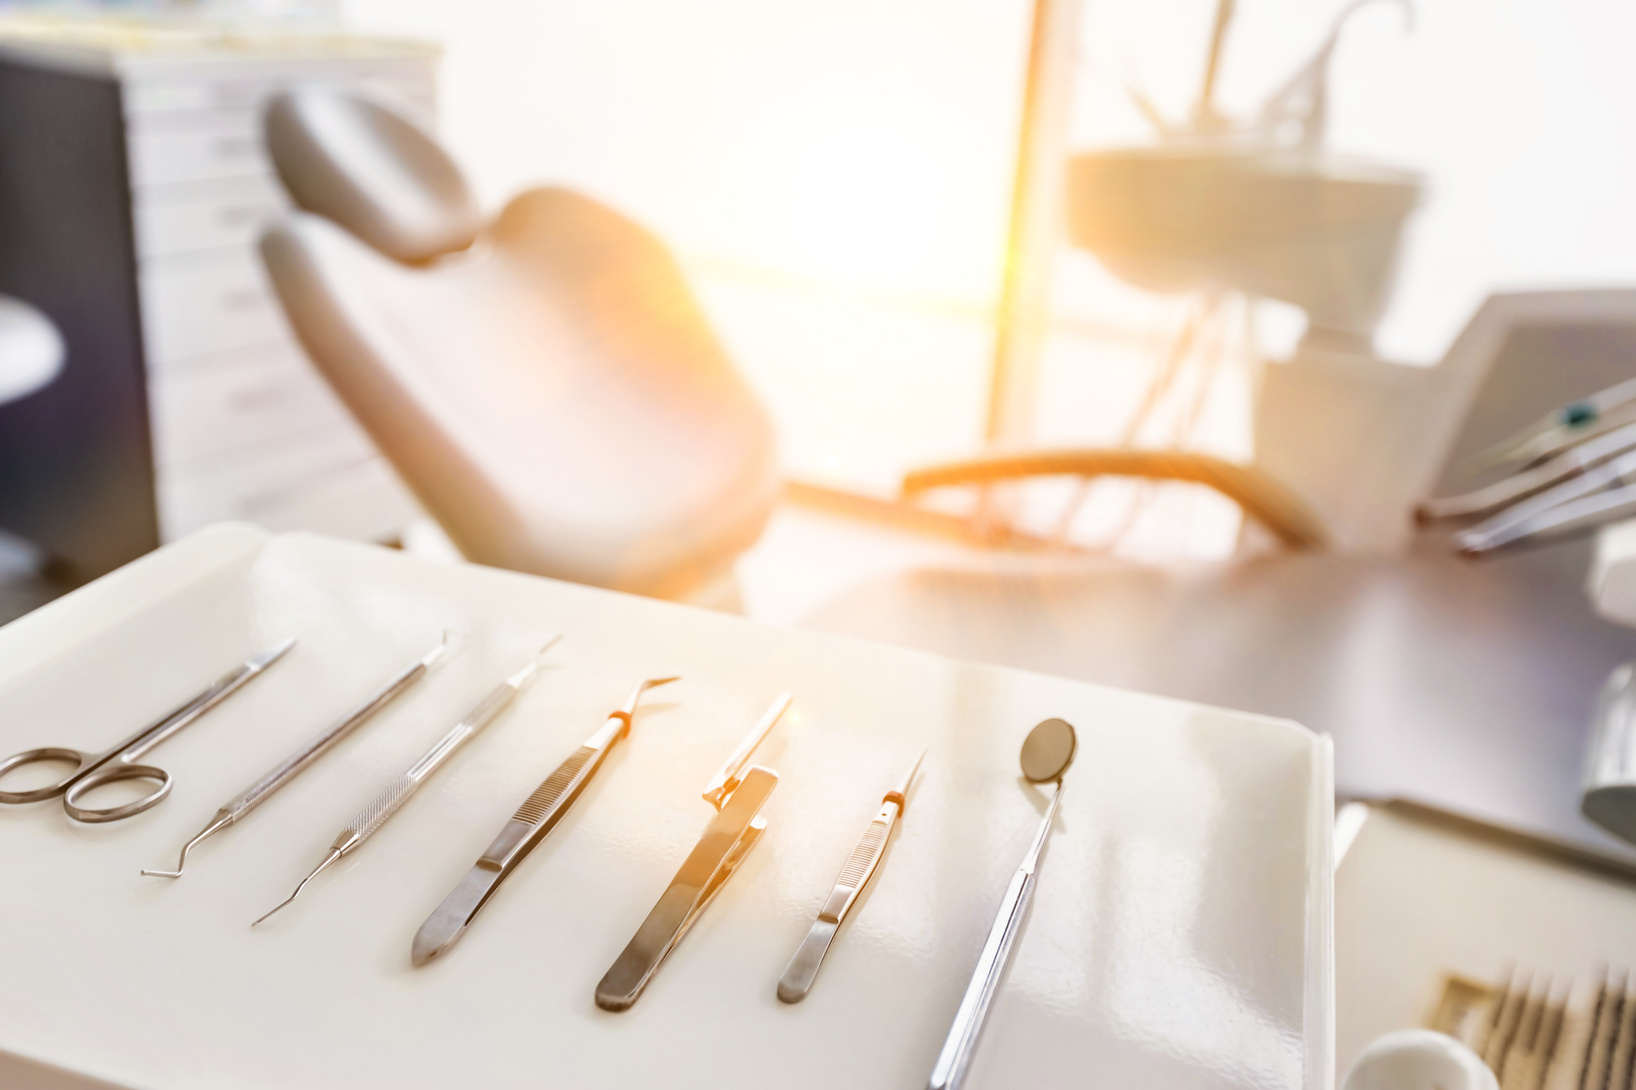 Dental clinic and dental instruments